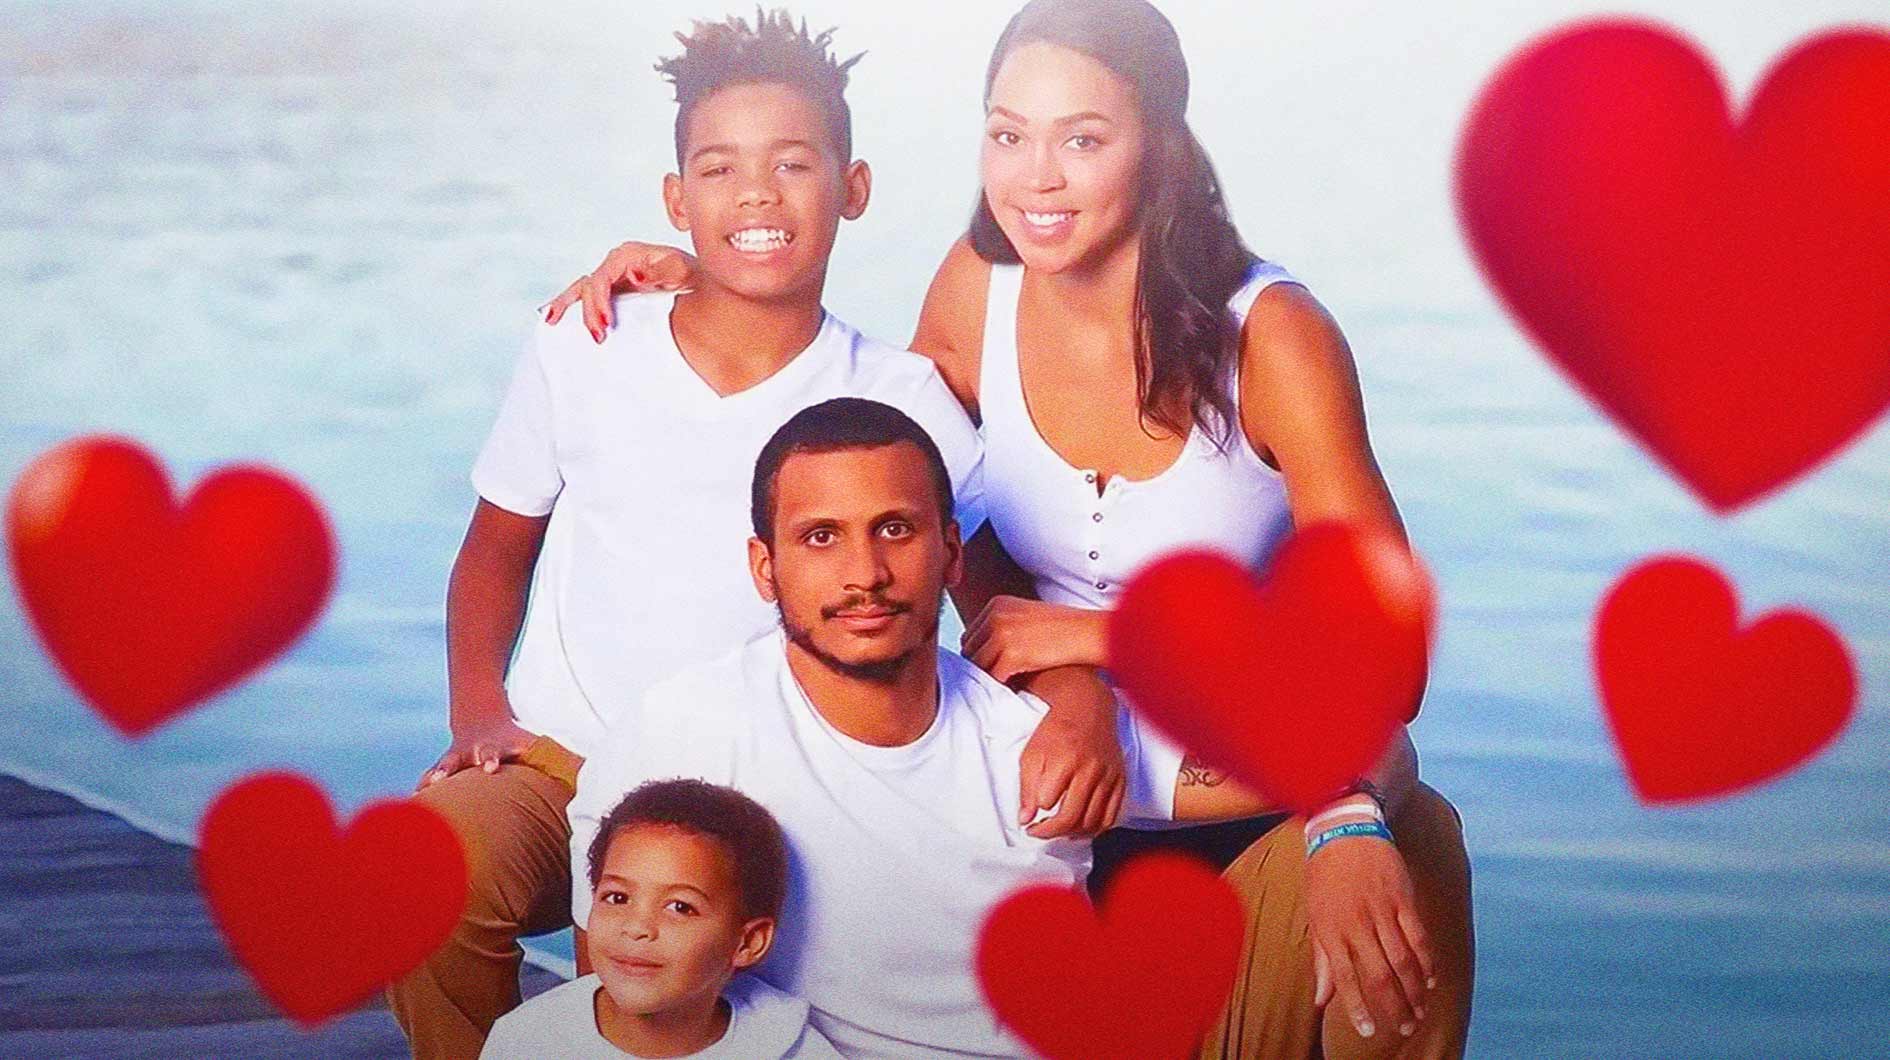 Boston Celtics coach Joe Mazzulla with his wife Camai Roberson and their two sons.